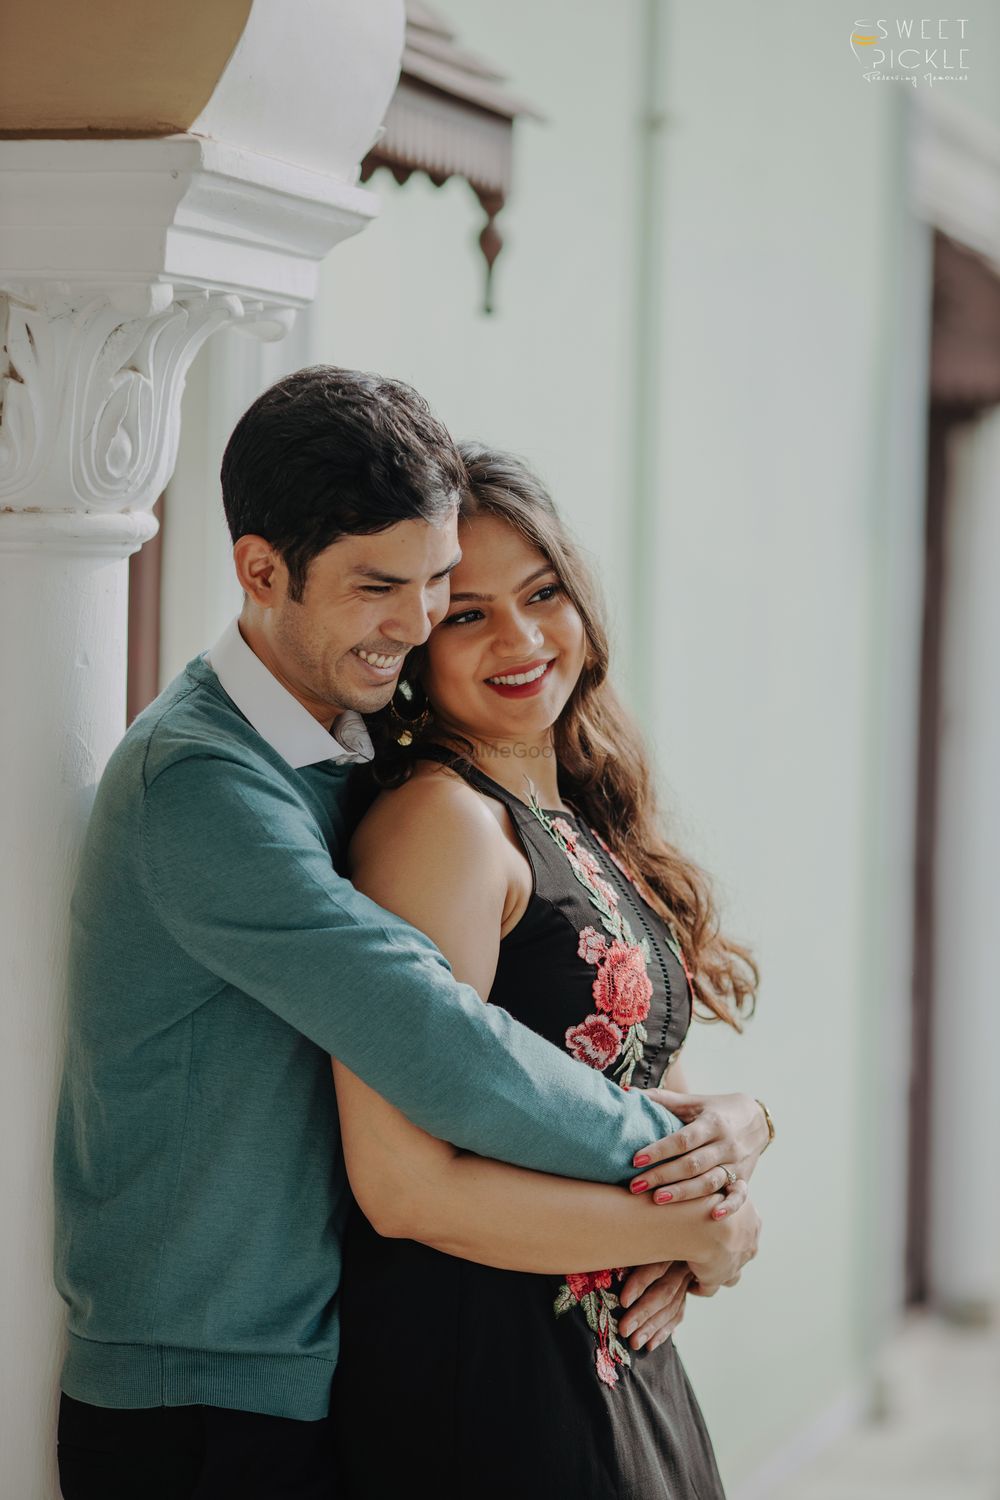 Photo From Priyanka & Voltaire - Pre Wedding - By Sweet Pickle Pictures